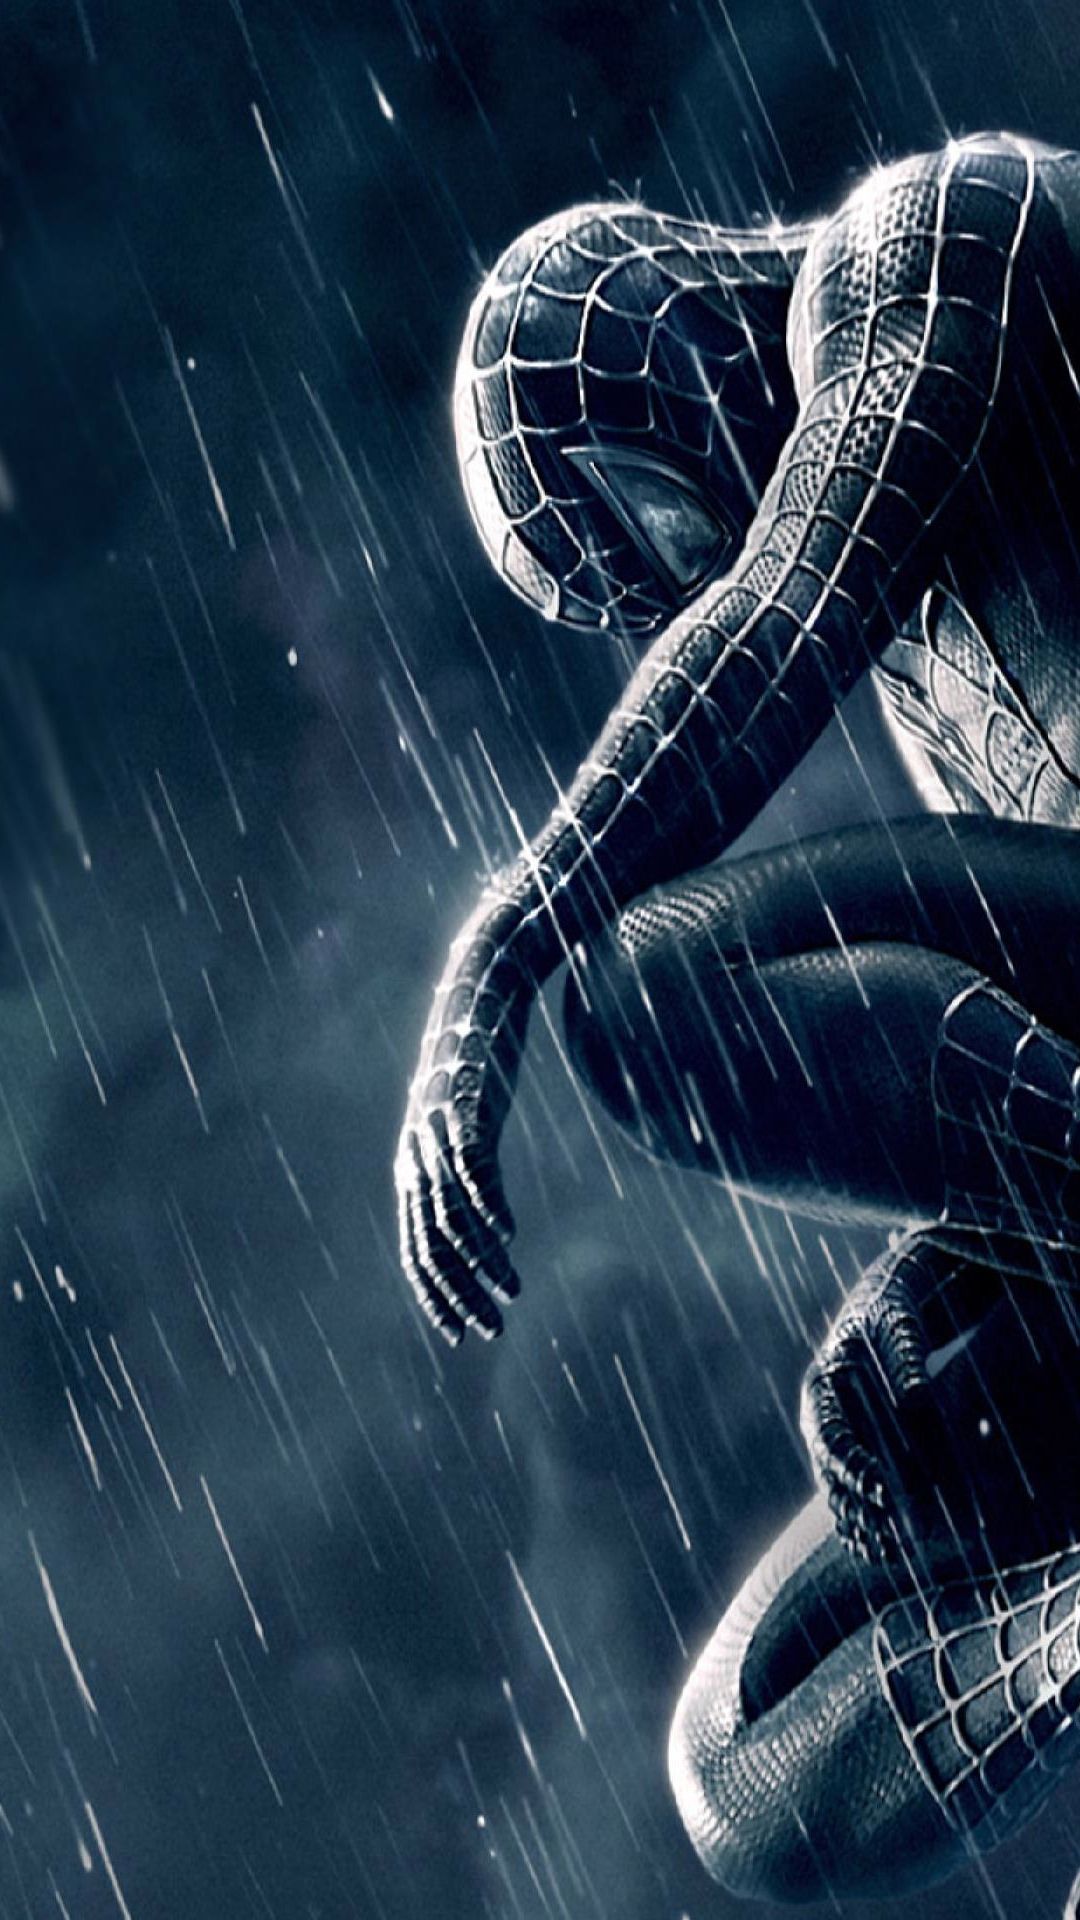 Spiderman with black suit Wallpaper ID5284